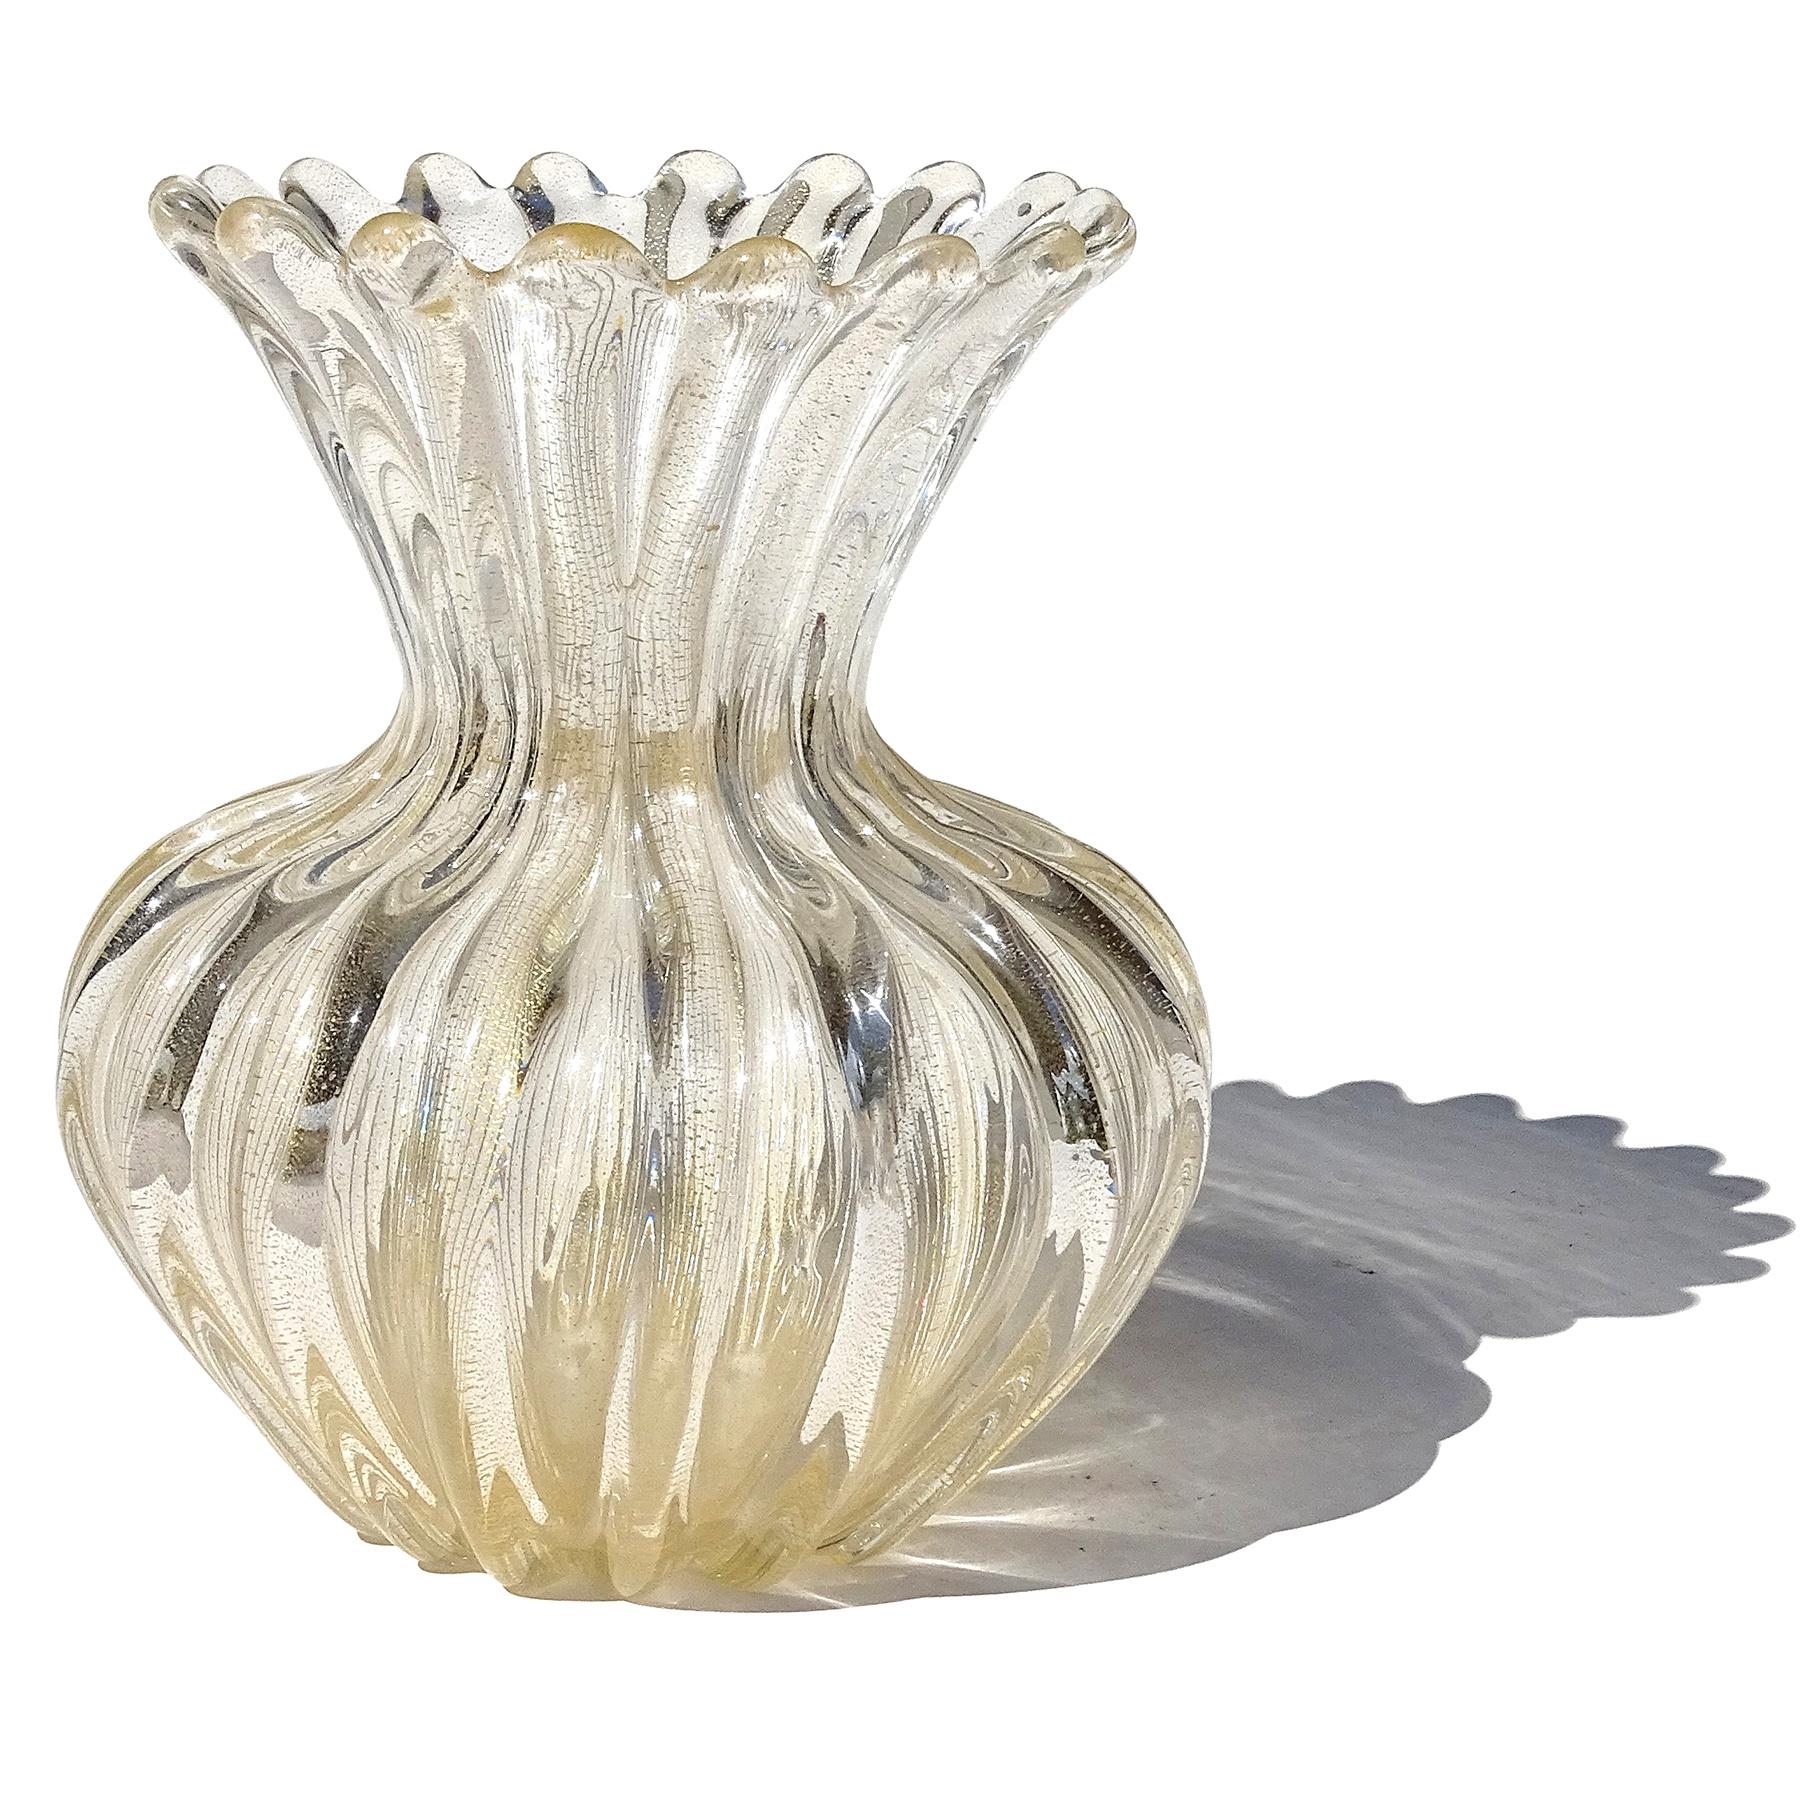 Beautiful vintage Murano hand blown clear and gold flecks Italian art glass flower vase. Attributed to the Seguso Vetri d'Arte company. The vase is signed 